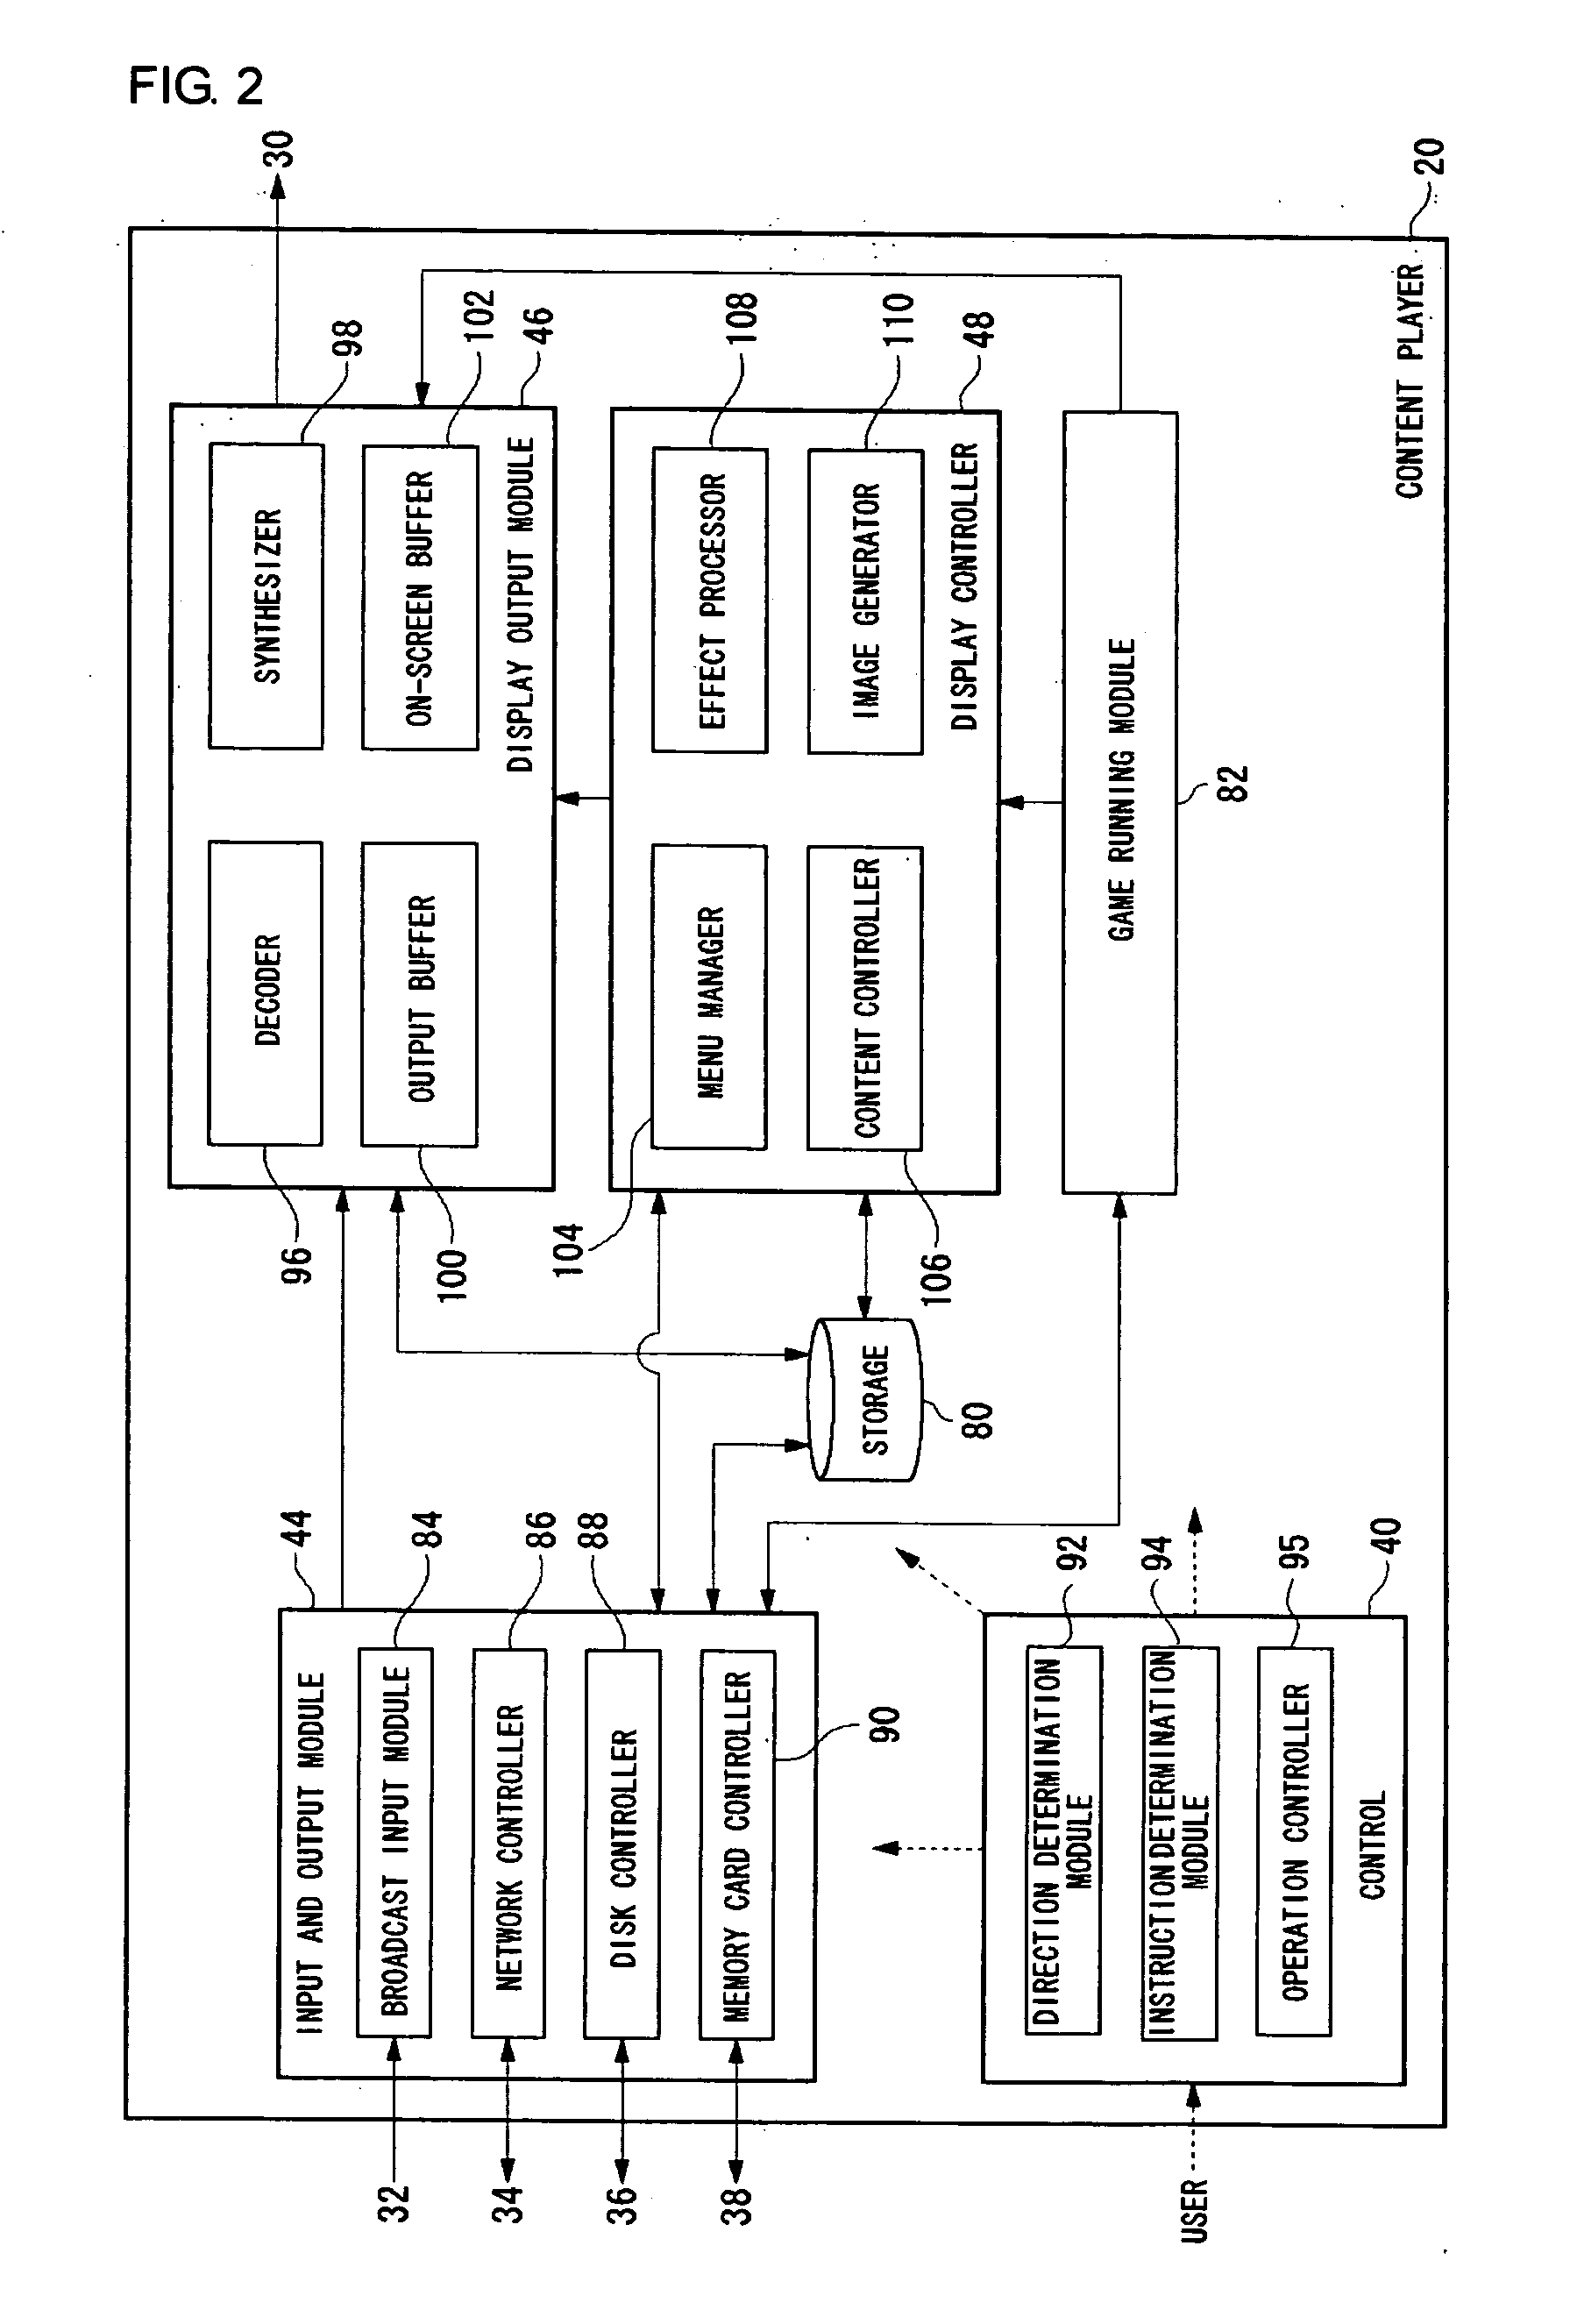 Content Reproduction Device and Menu Screen Display Method